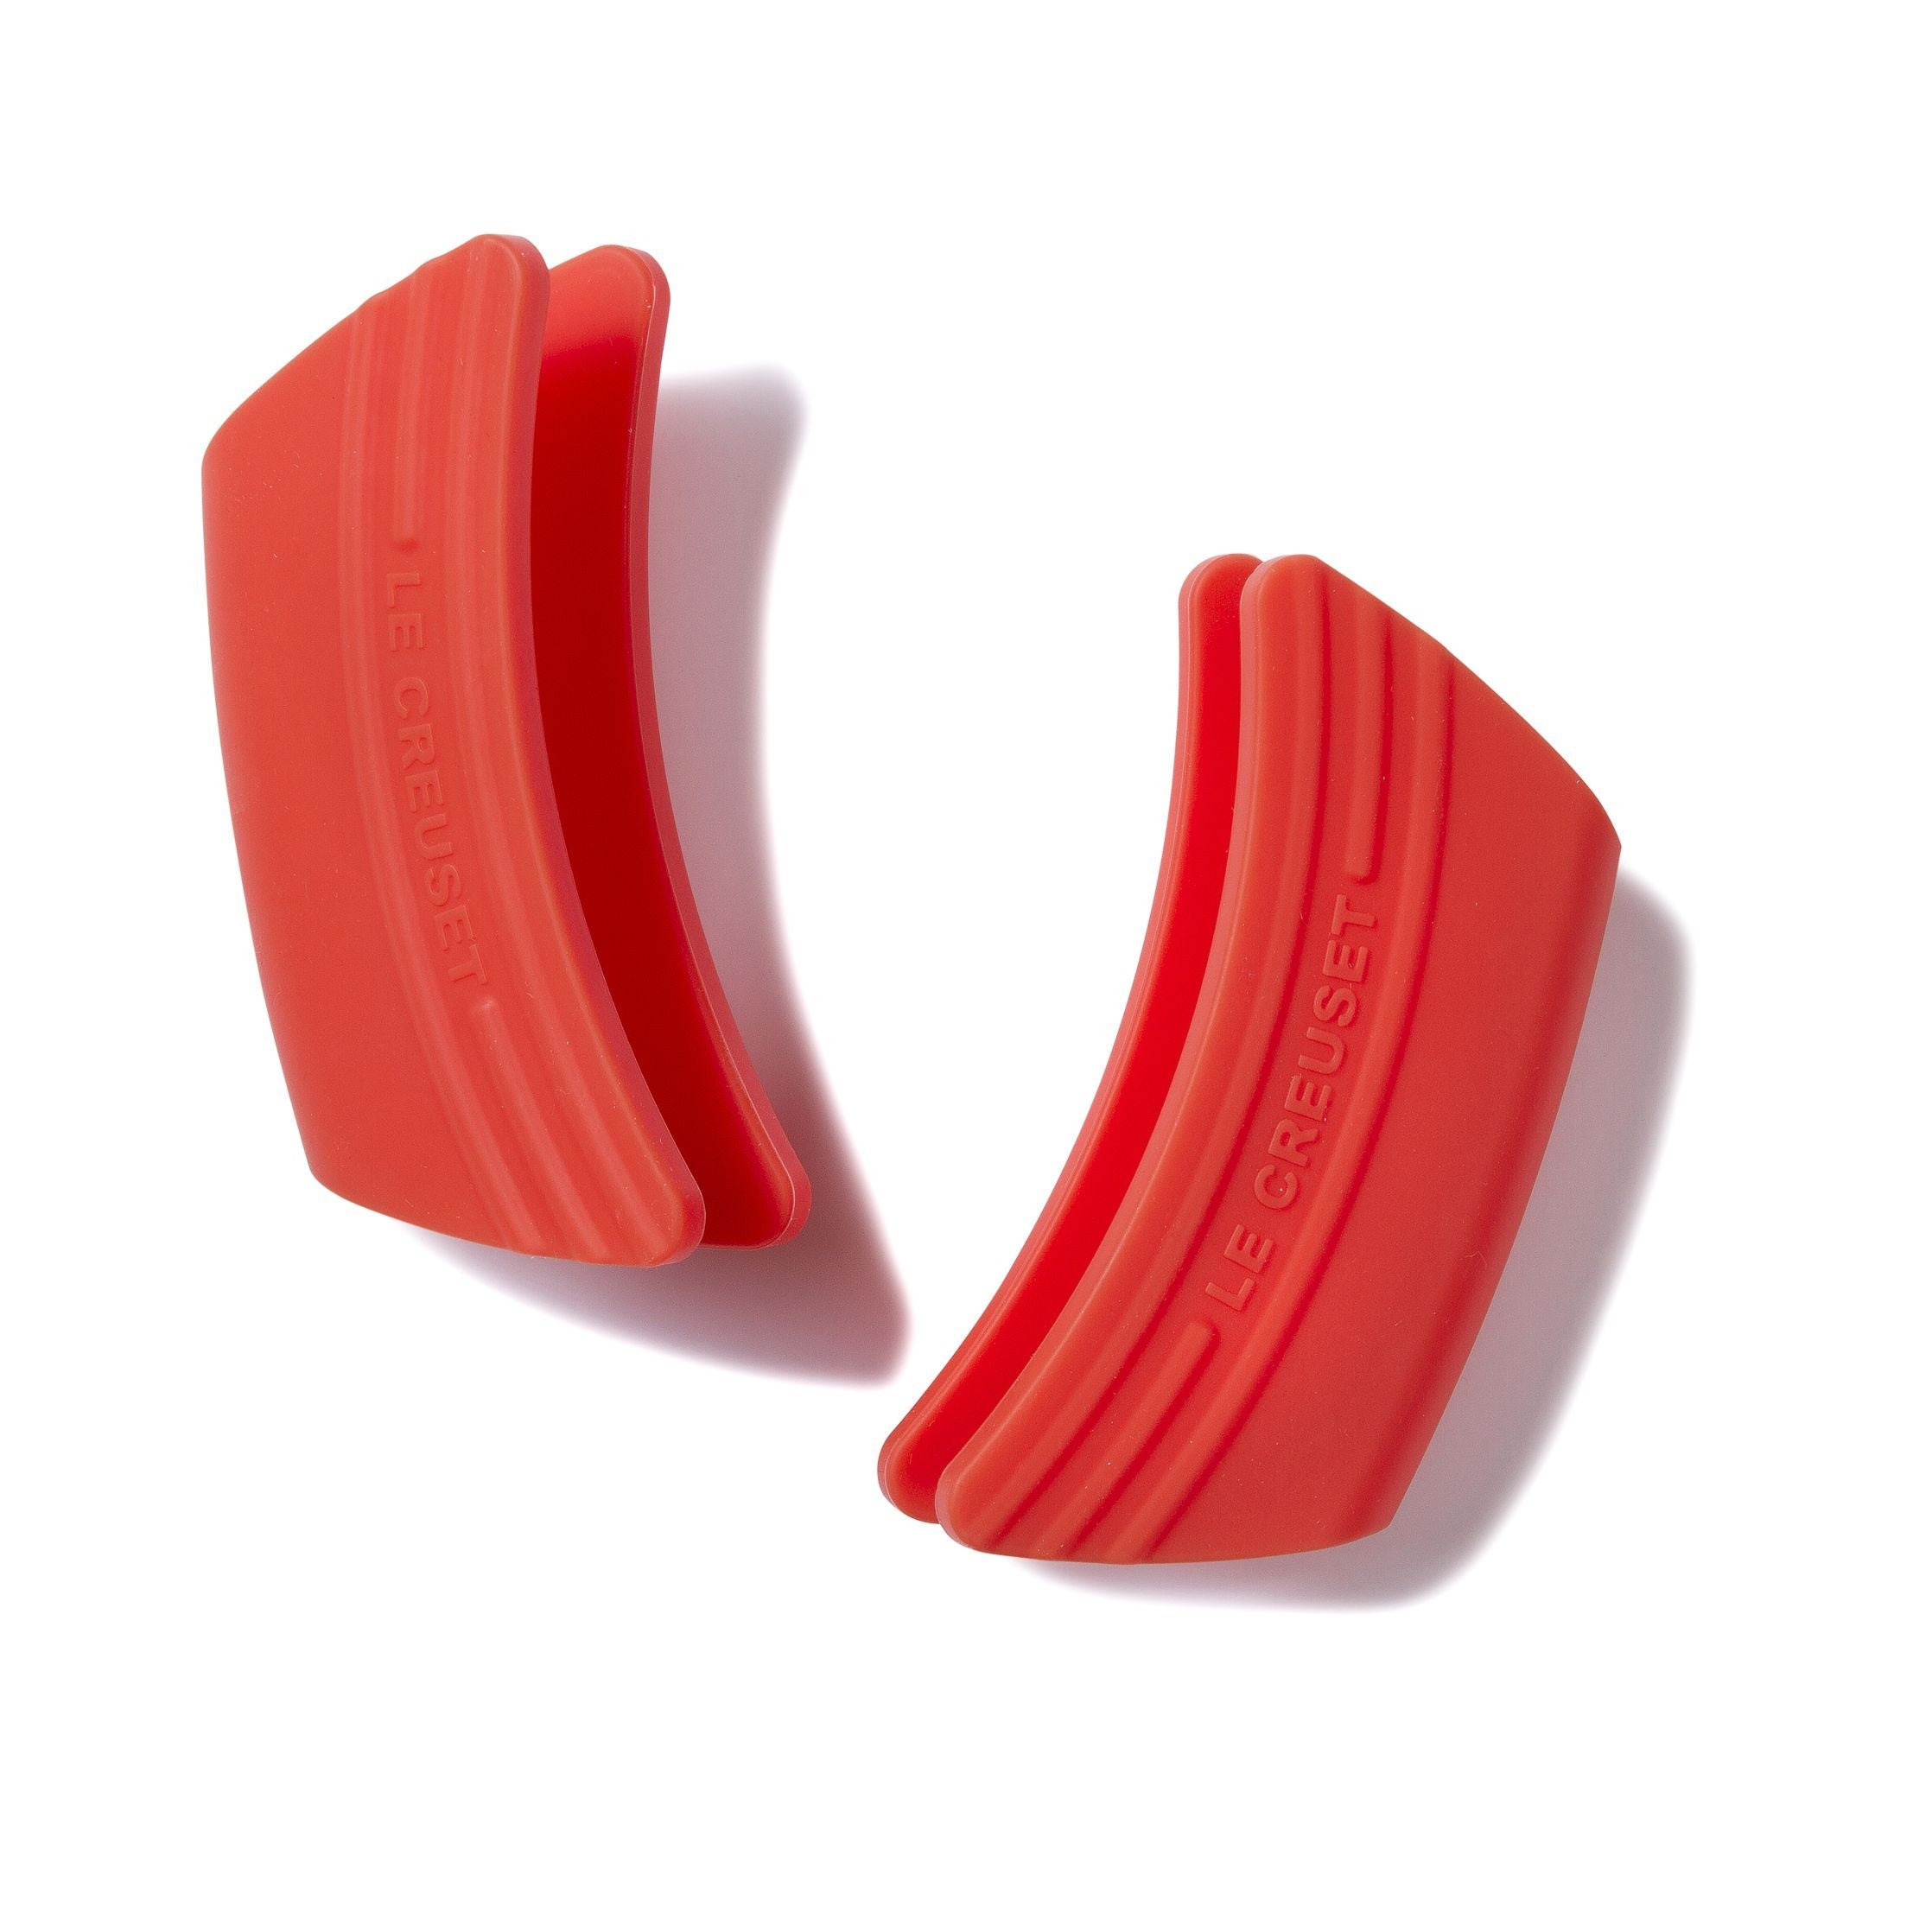 Le Creuset Silicone Handle Guard 2 Pcs., Oven Red